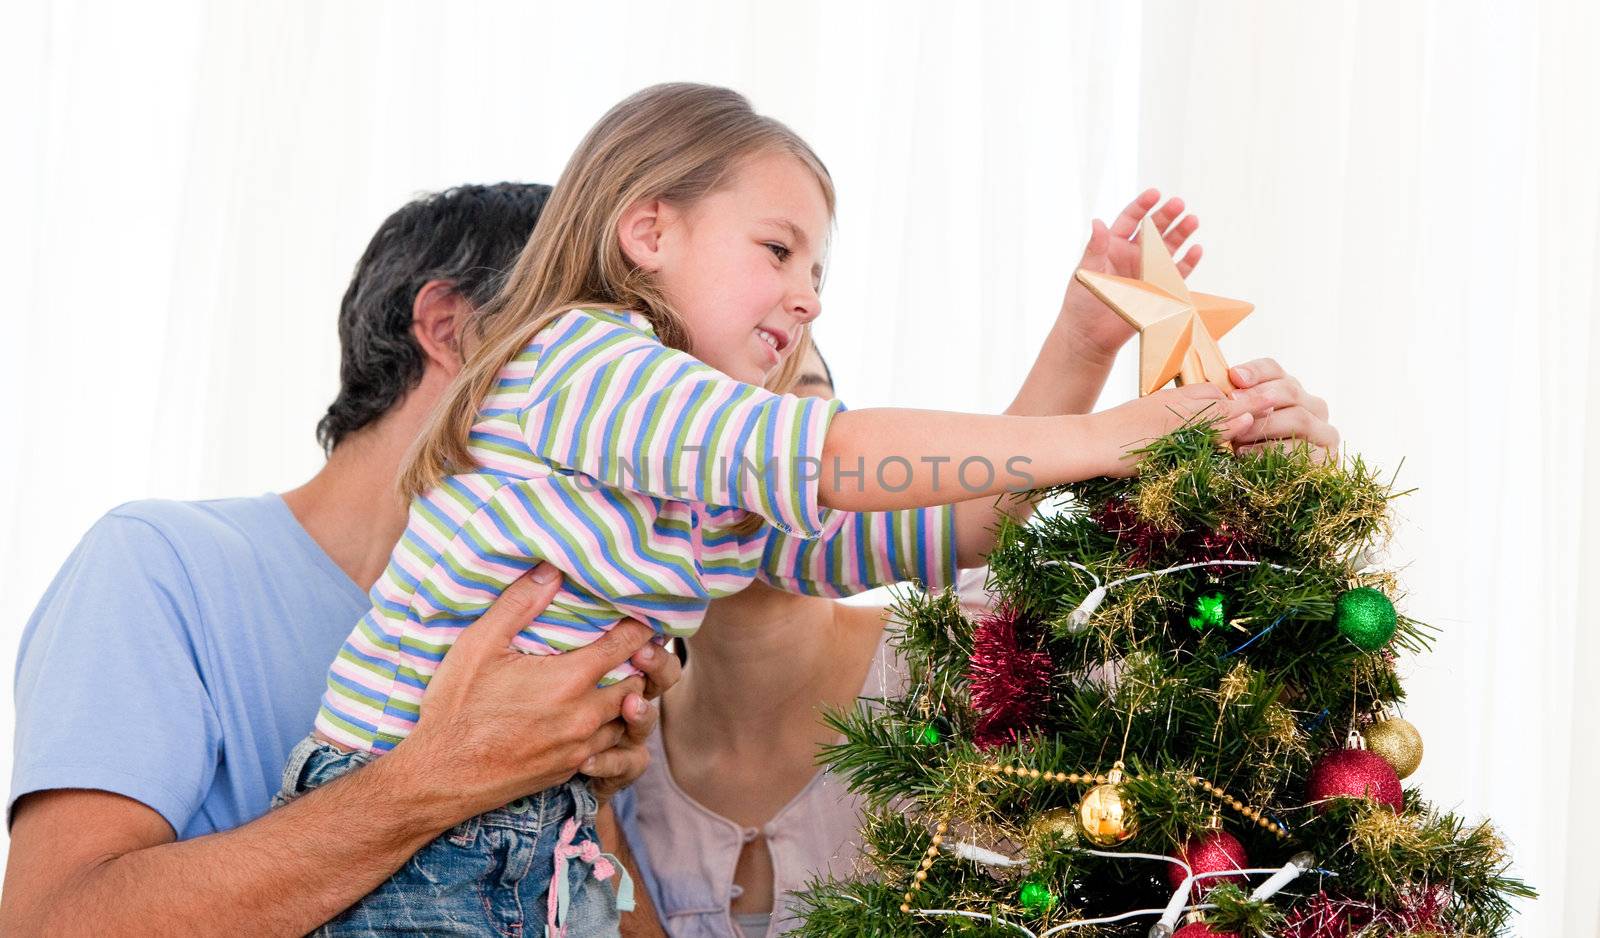 Little girl placing a star in a Christmas tree by Wavebreakmedia